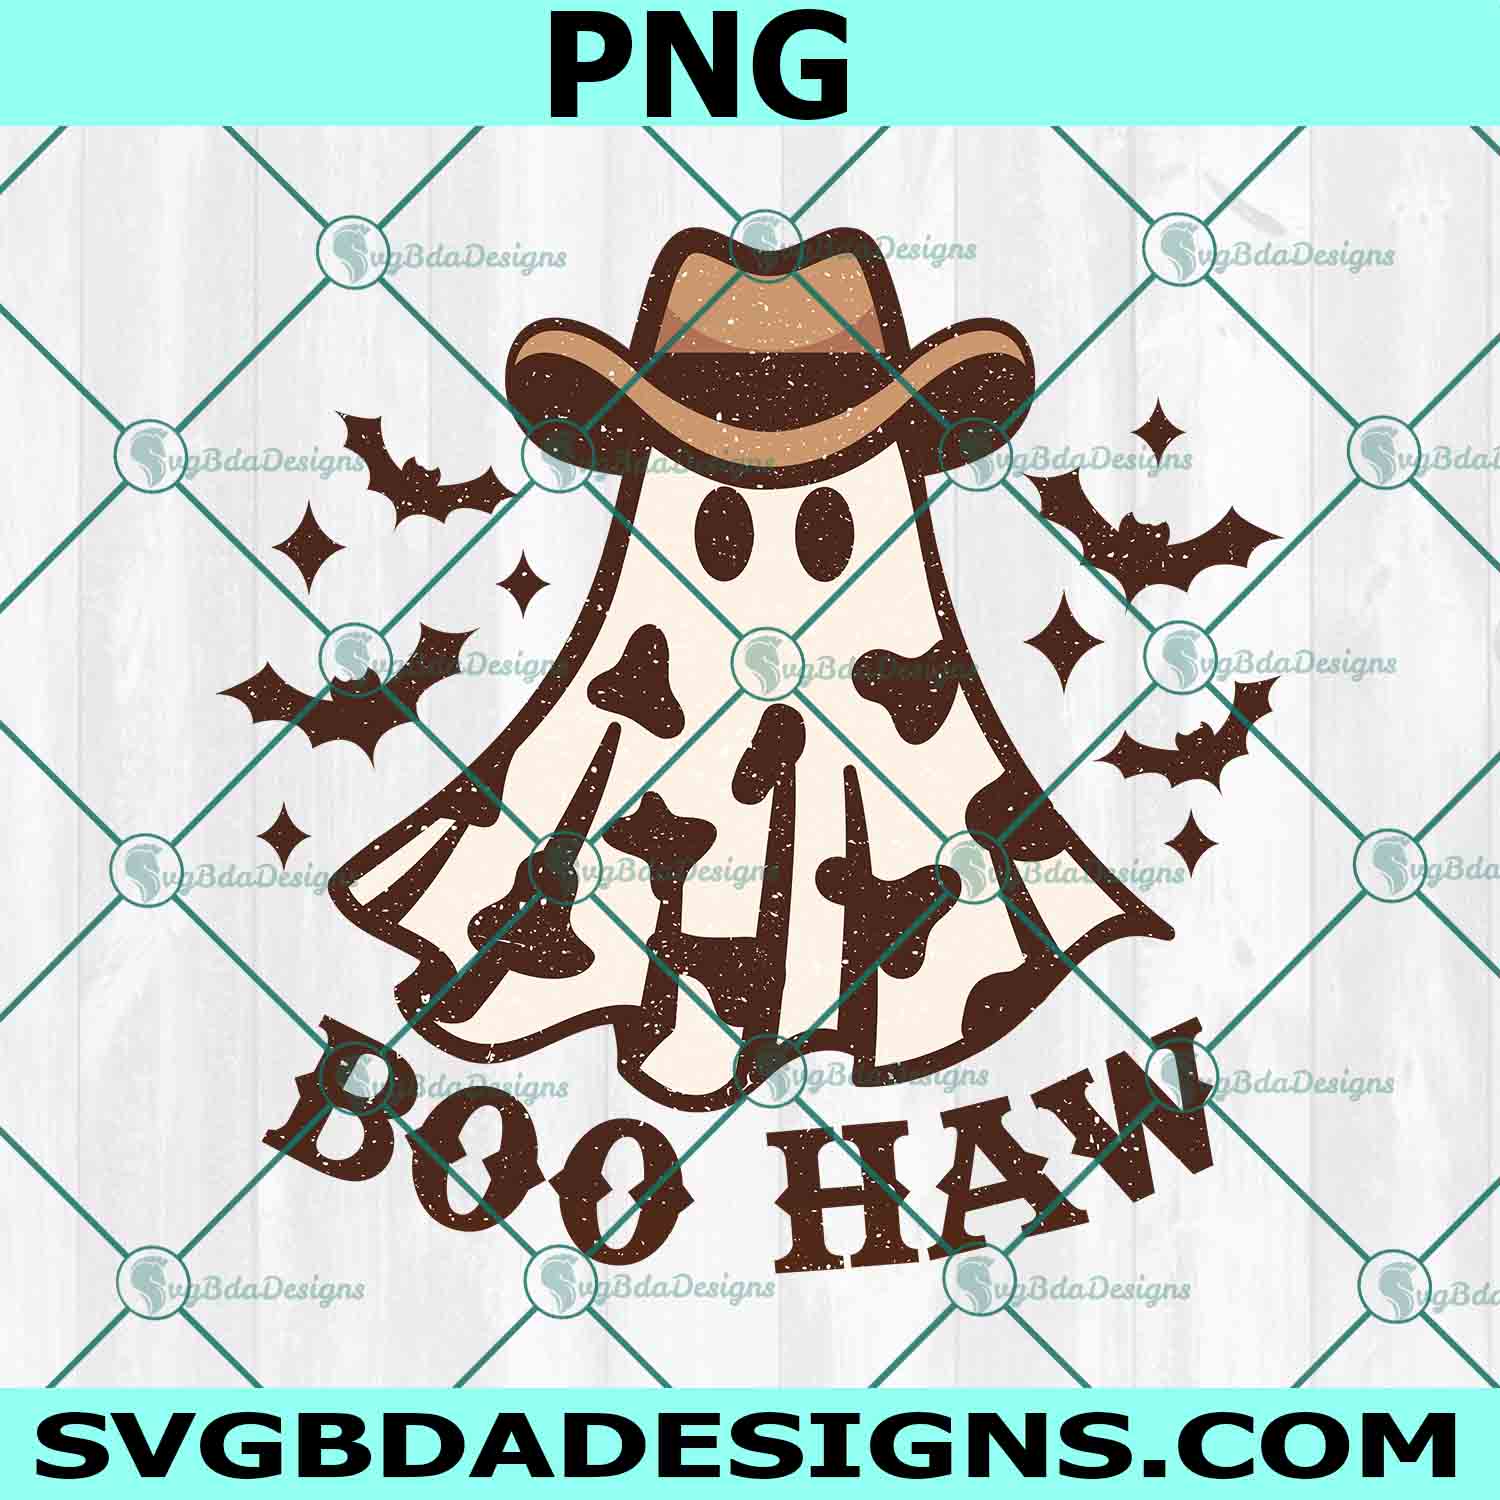 Boo Haw Western Ghost Sublimation PNG, Western Ghost png, Retro Halloween Design, Cowboy Ghost png, Western Halloween Sublimation, Vintage Ghost Halloween PNG